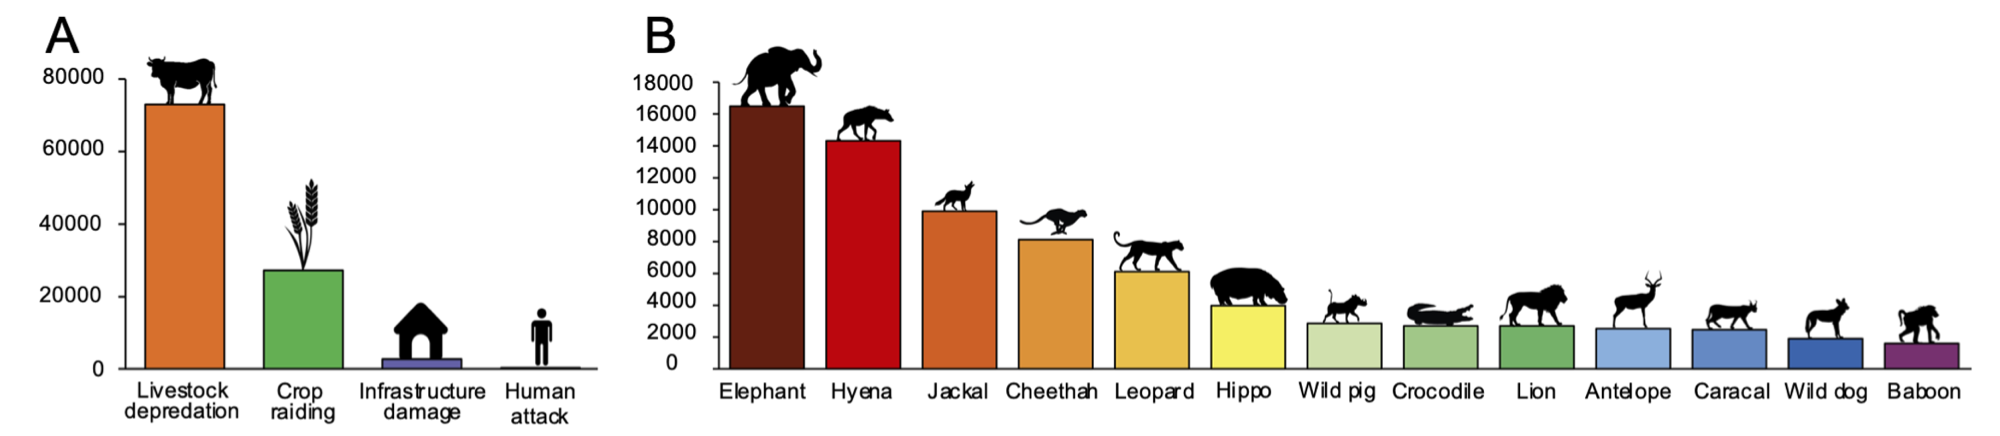 A bar chart showing impacts of various animals.